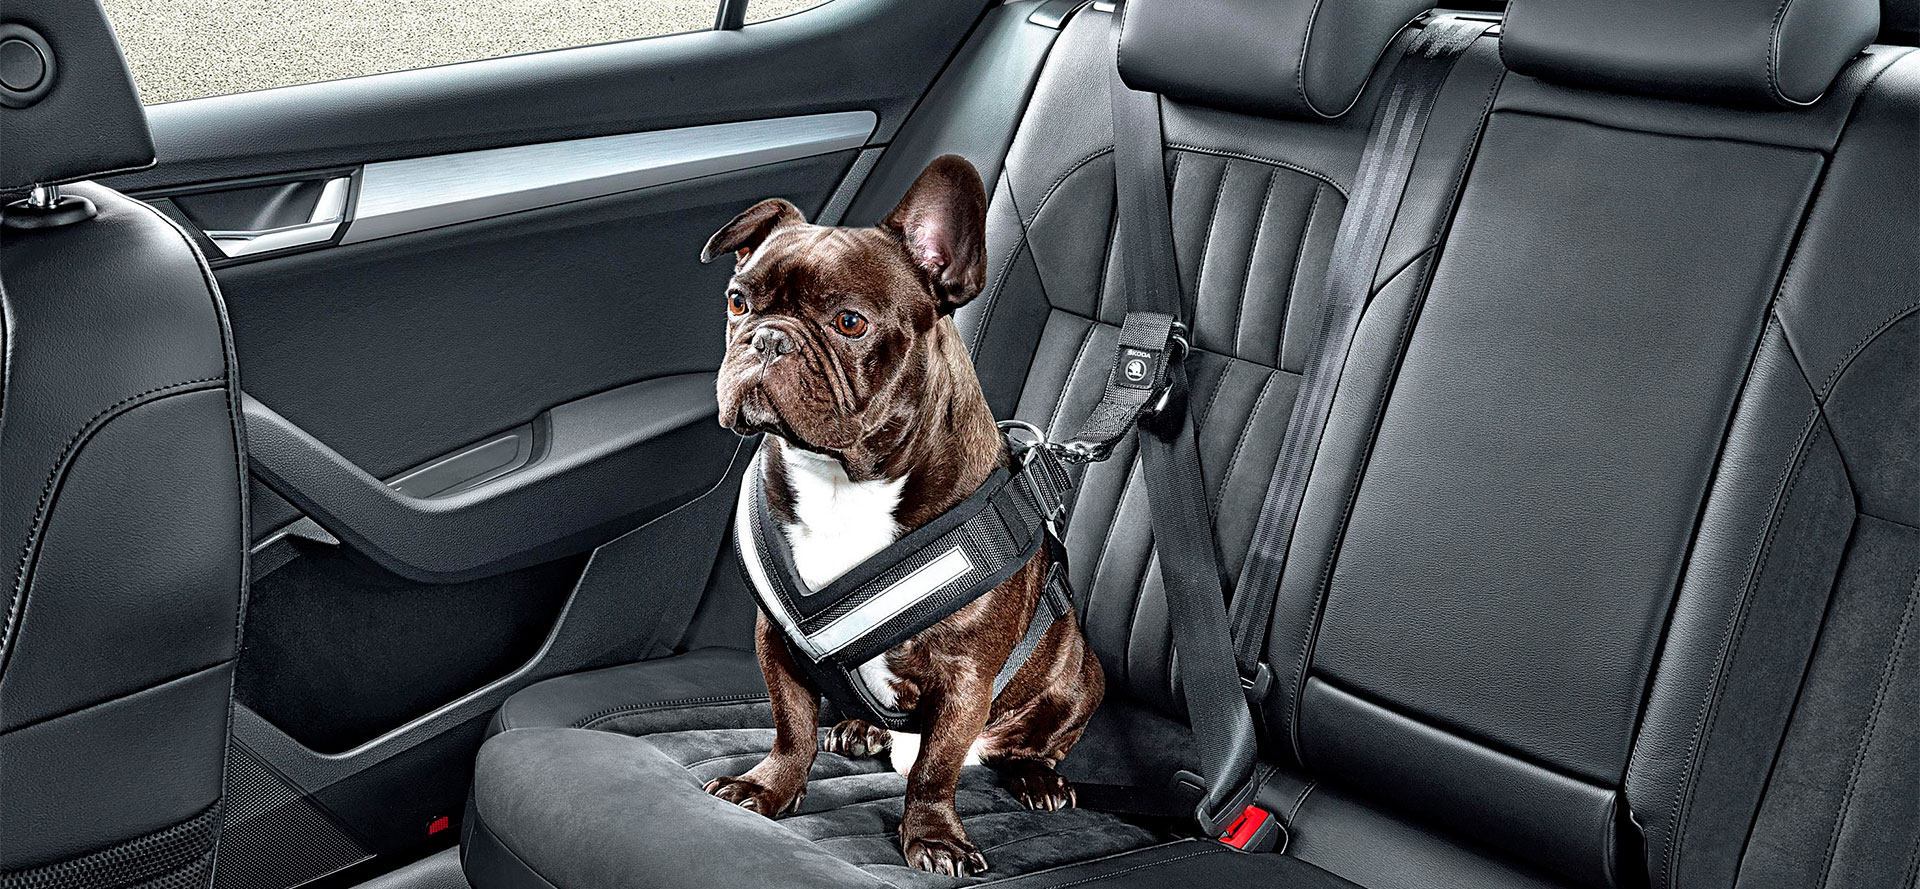 Seat Belt for Small Dog.